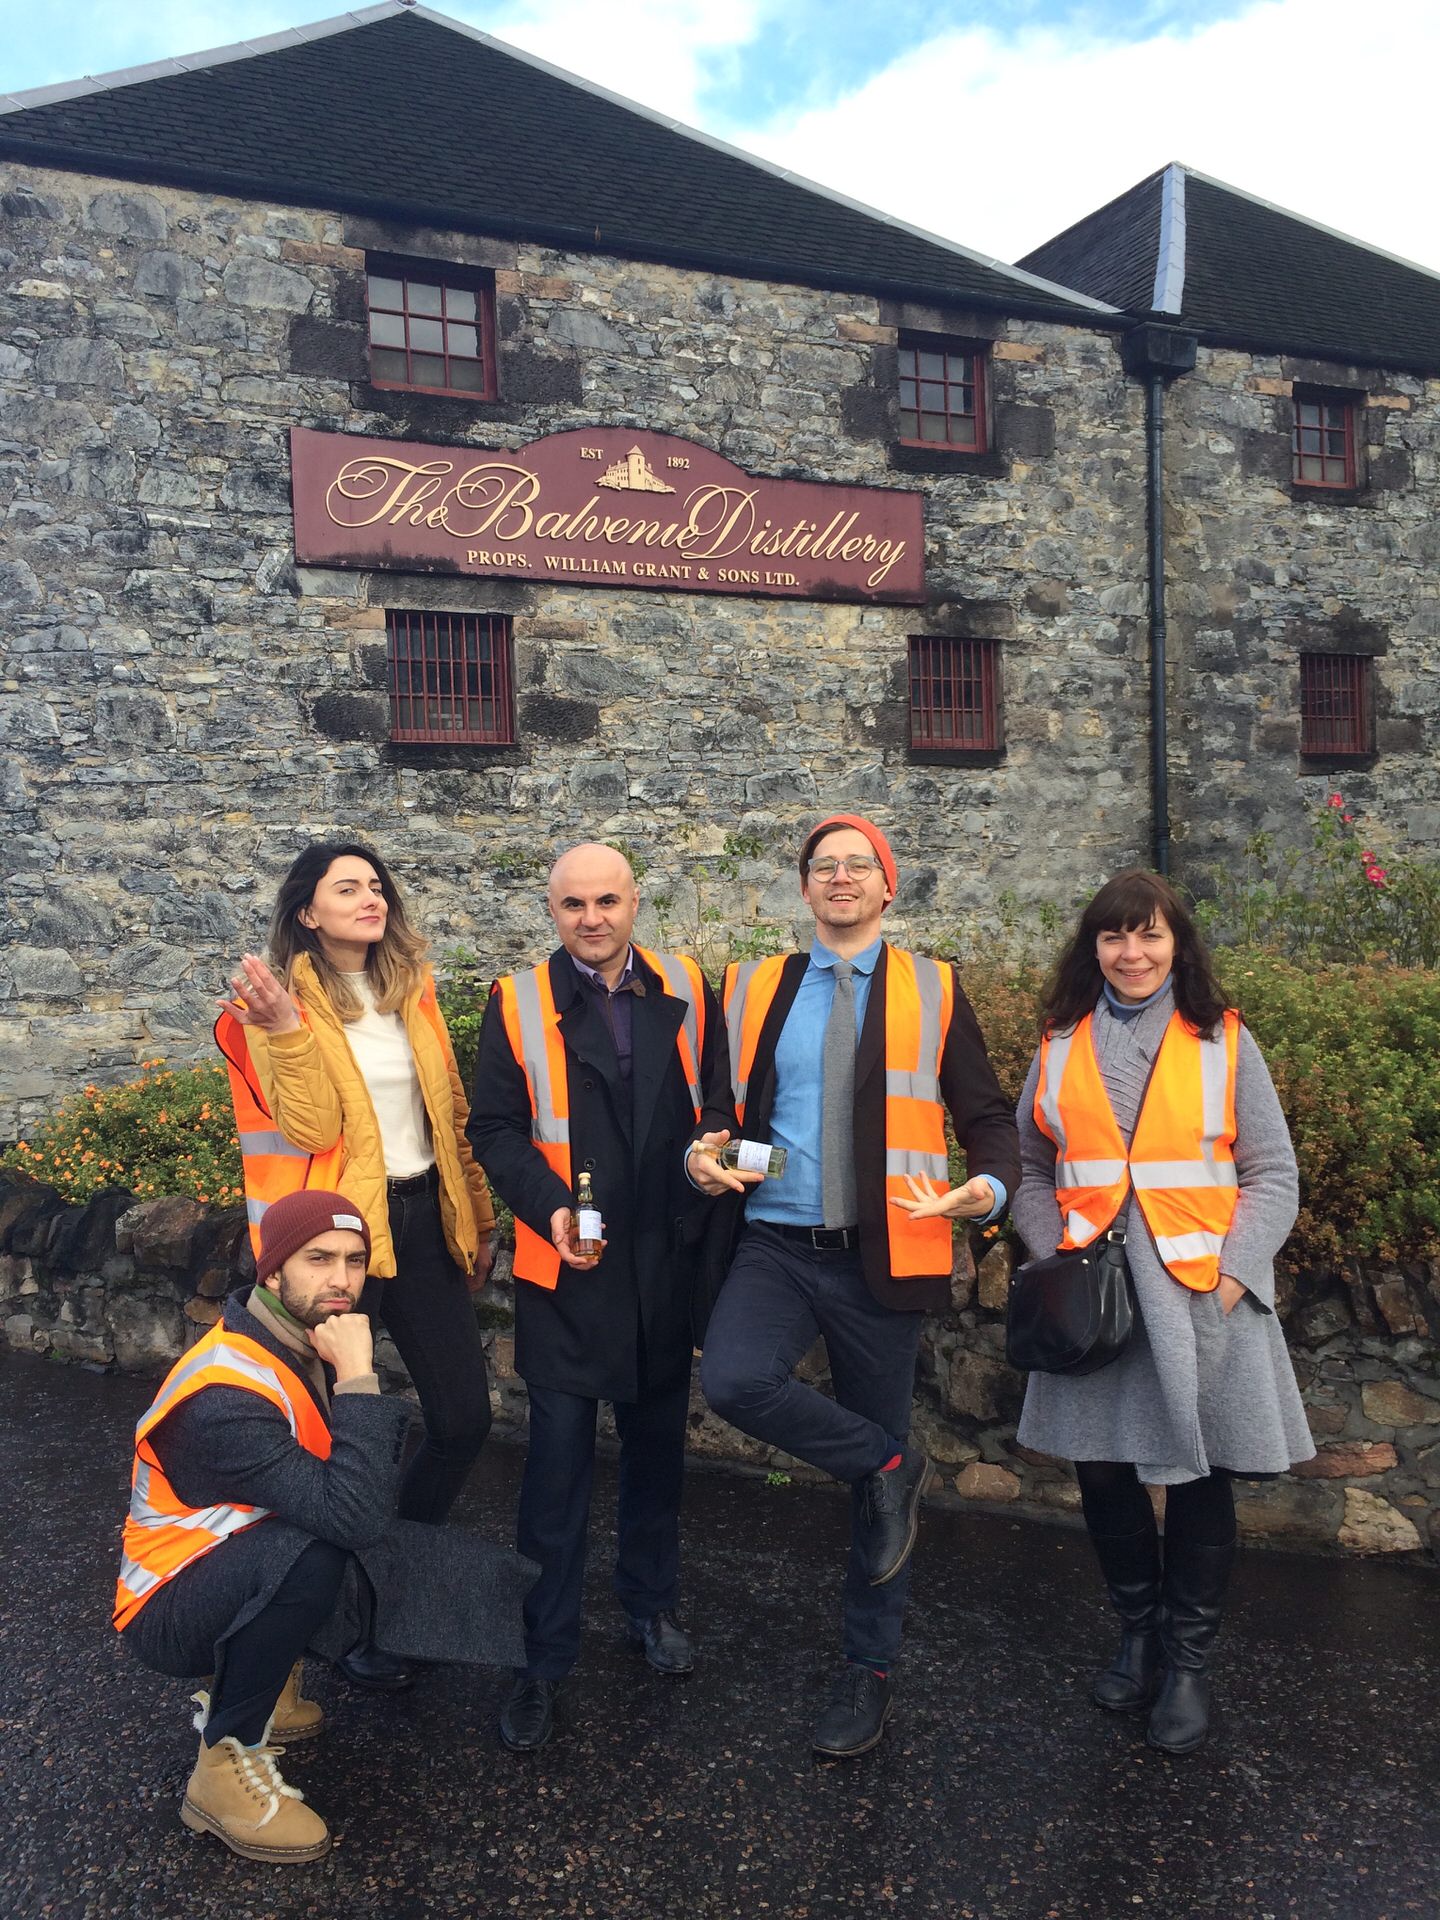 a press tour to William Grant & Sons whisky distillery in Scotland